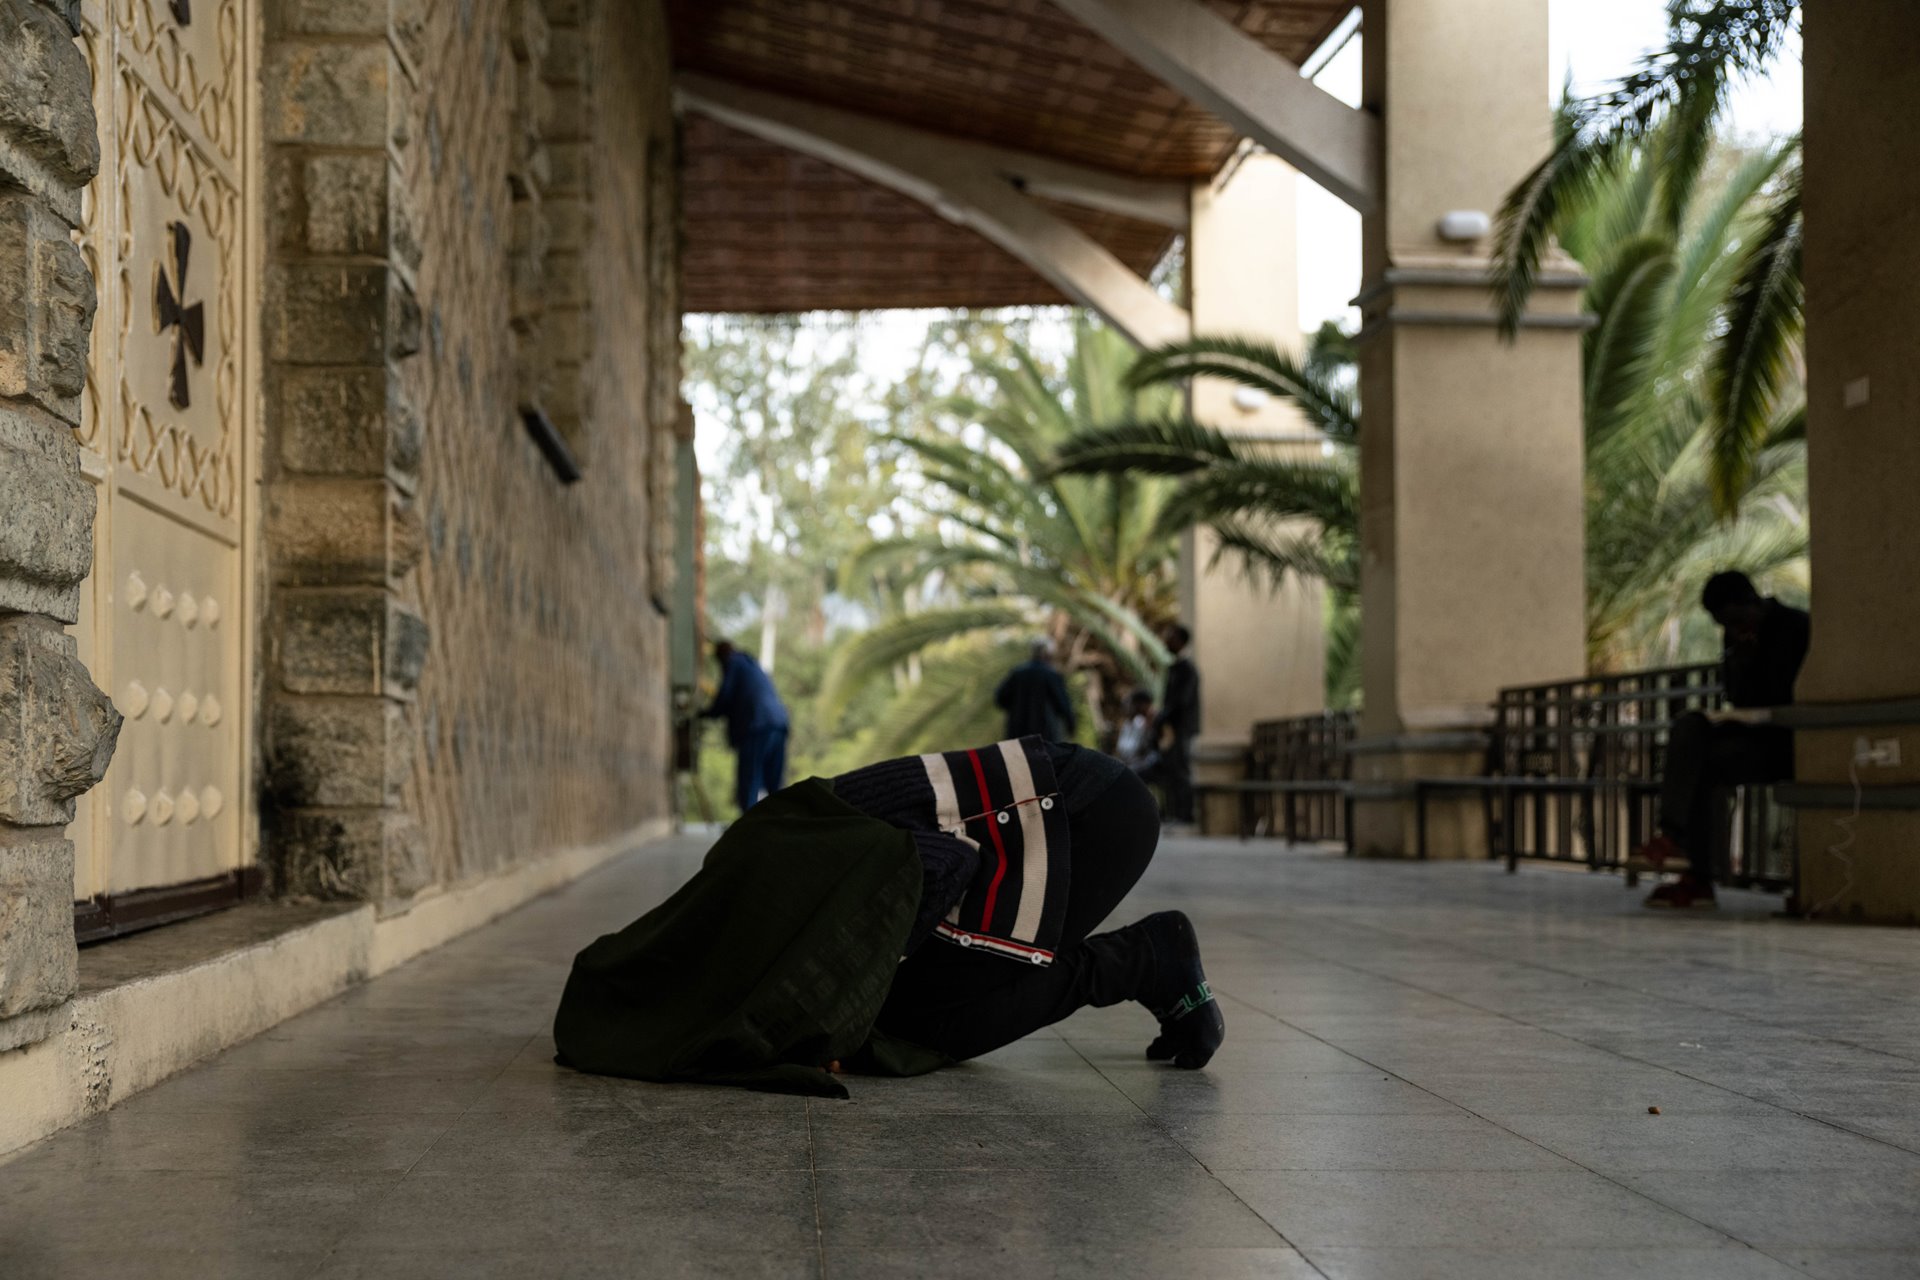 Shila (32) performs her evening prayer in front of an Orthodox Christian church in Mekele, Ethiopia. The population of Tigray is over 90 percent Orthodox Christian.